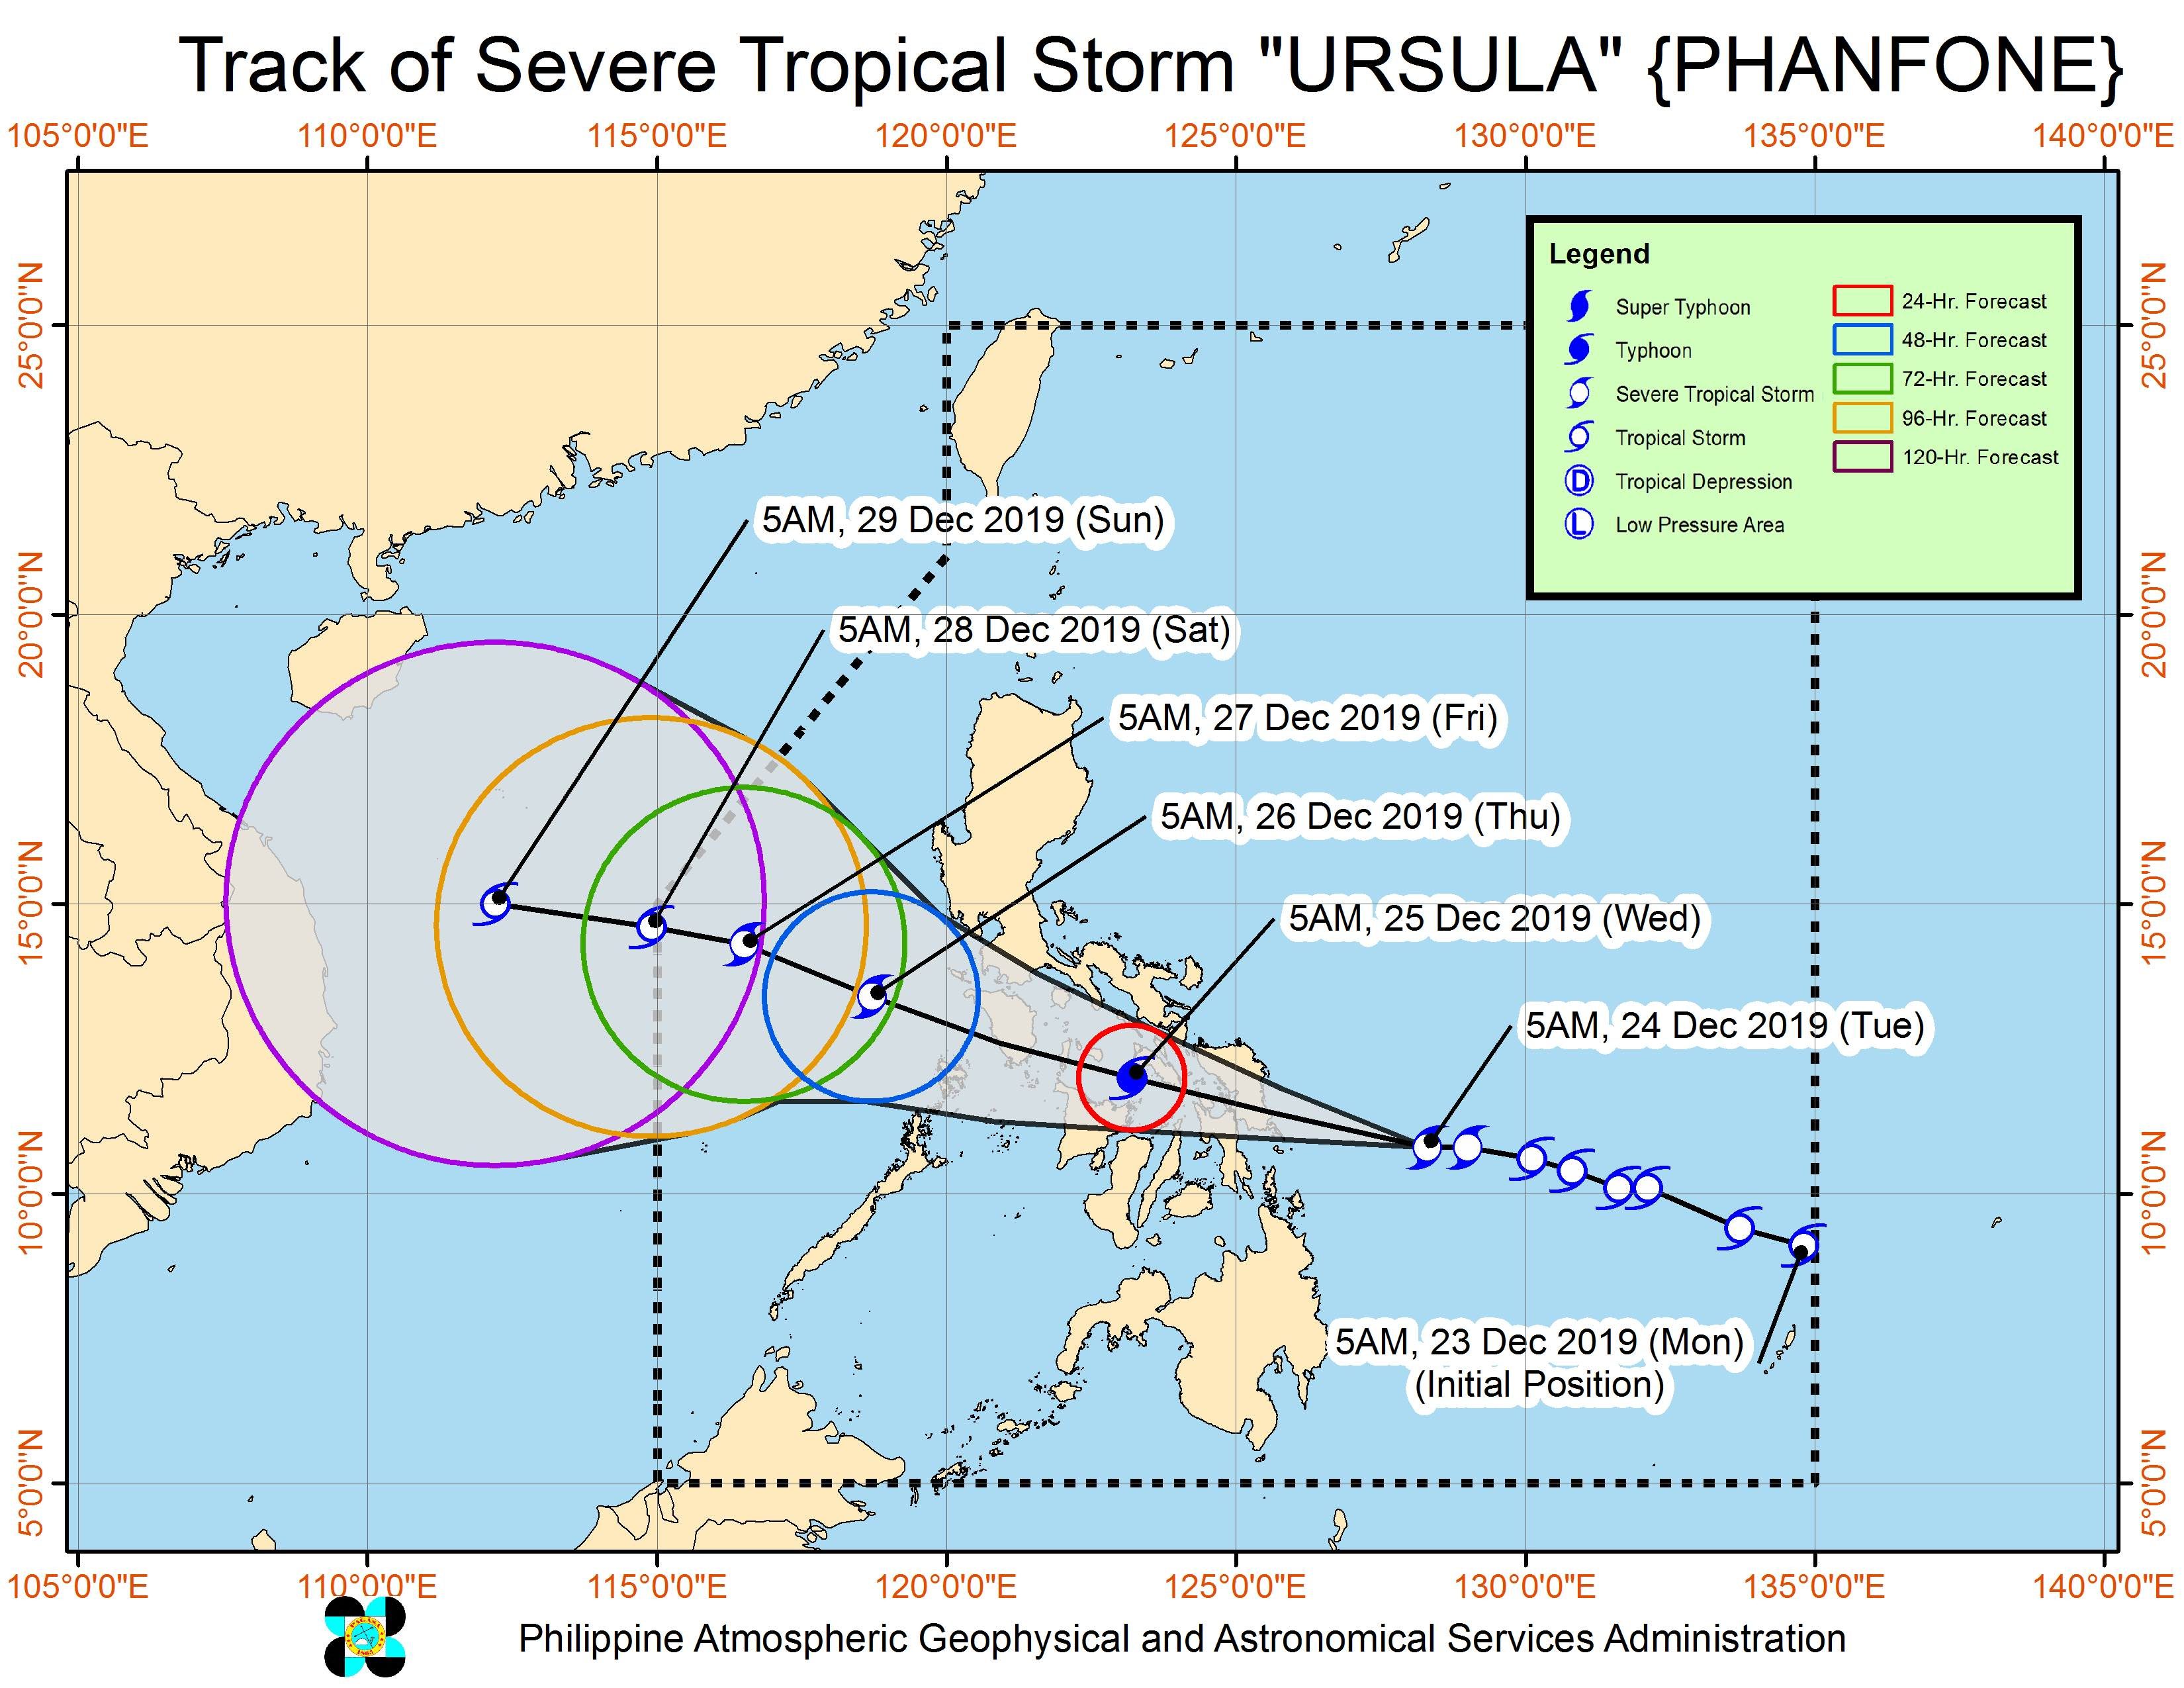 Forecast track of Severe Tropical Storm Ursula (Phanfone) as of December 24, 2019, 8 am. Image from PAGASA 